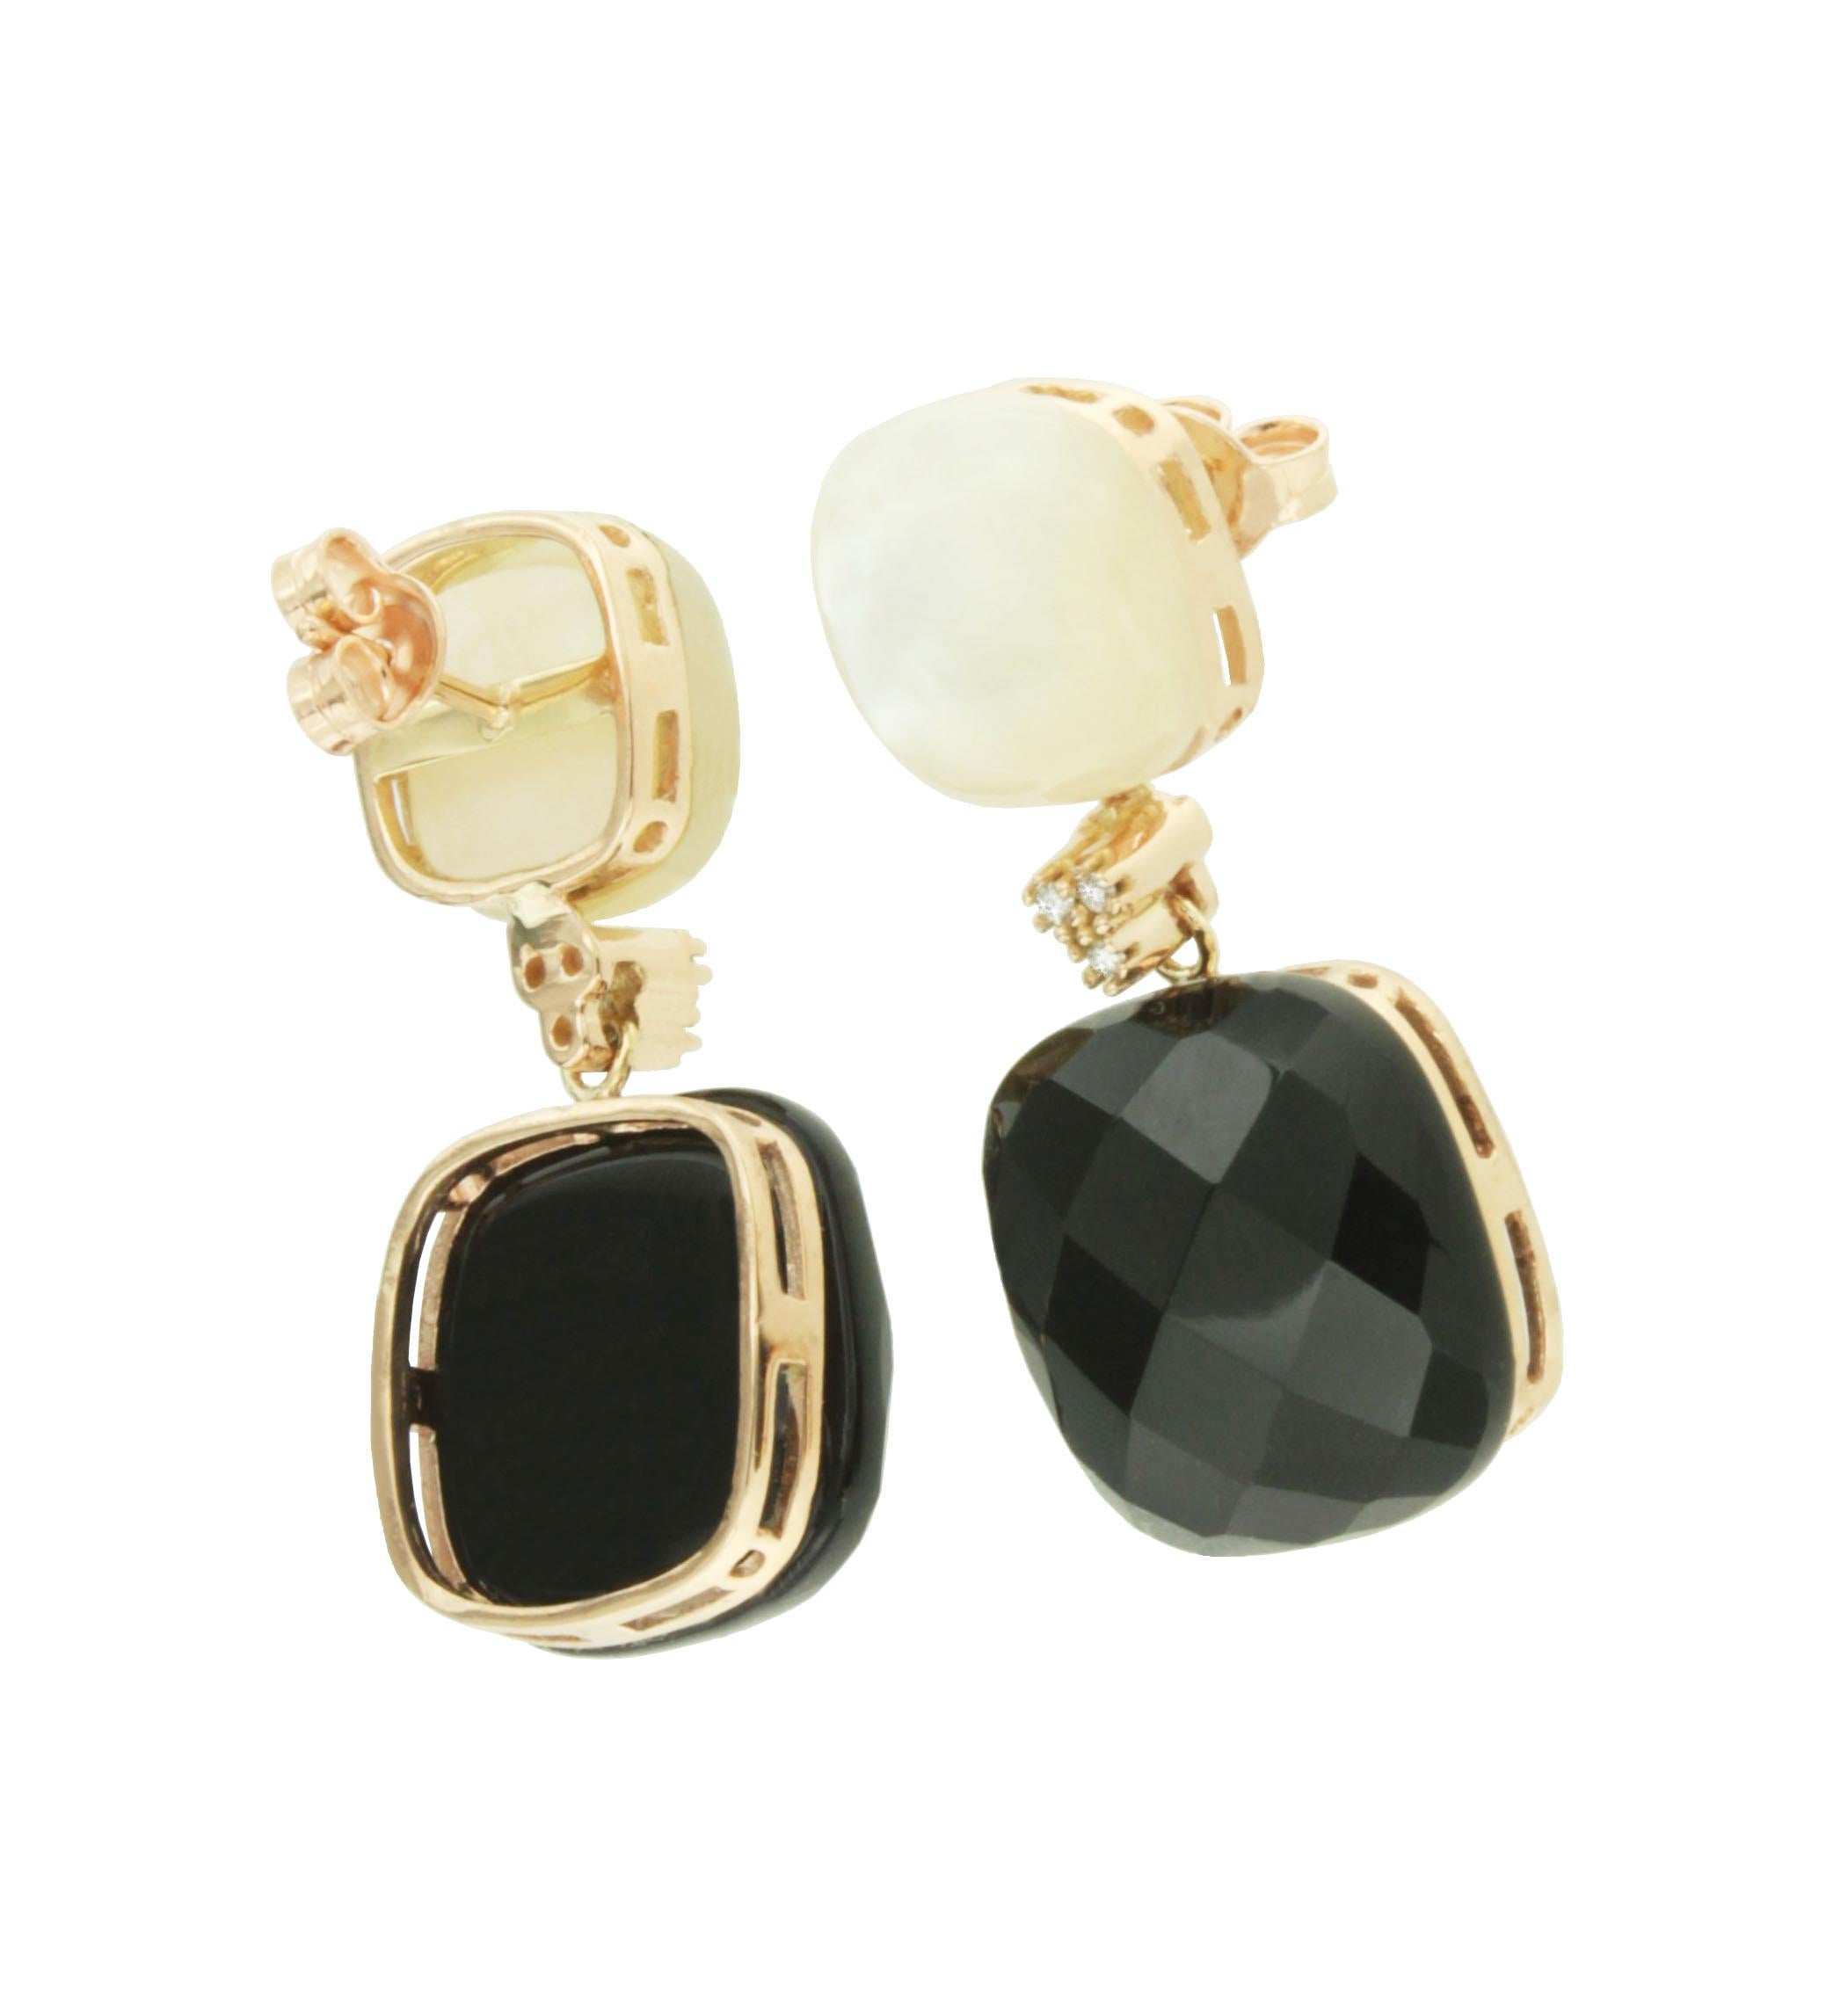 The combination of gold, onix and mother of pearl gives a touch of modernity and elegance. This piece is easy to wear. In any occasion, you can wear these earrings and feel comfortable and trendy. This earrings is part of the collection 